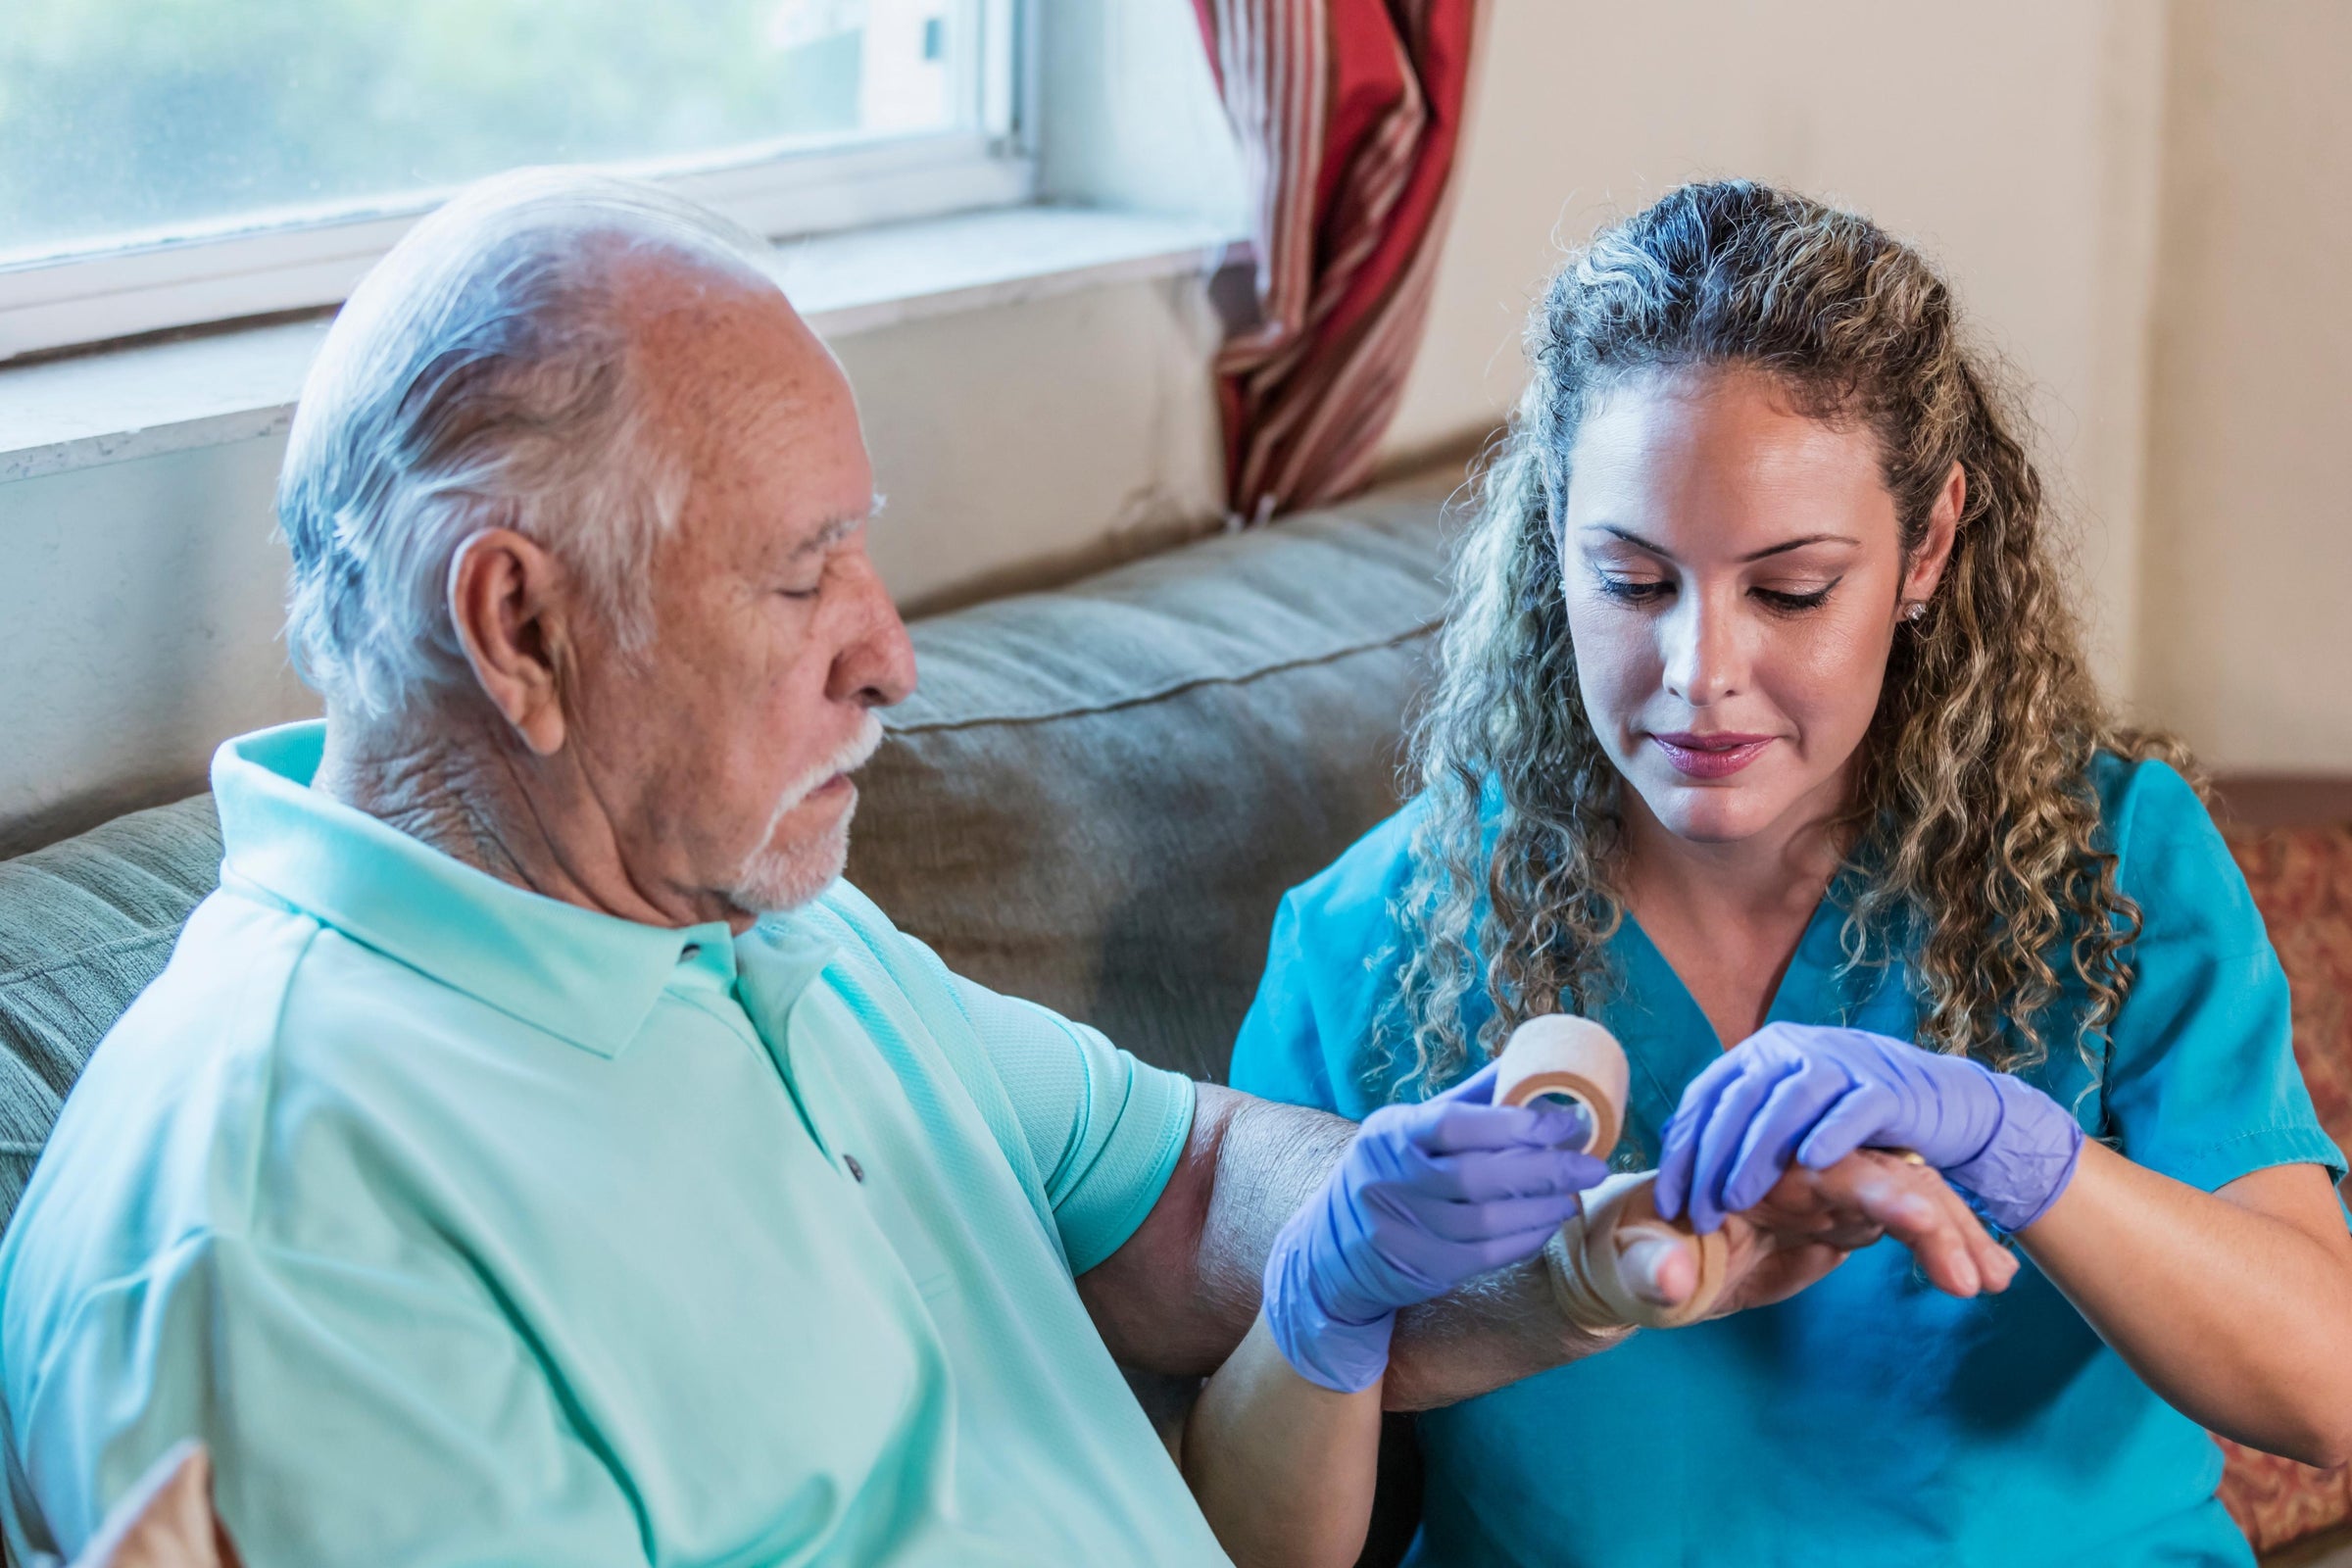 Nurse putting a bandage around an elderly patient's hand going through different stages of healing wound